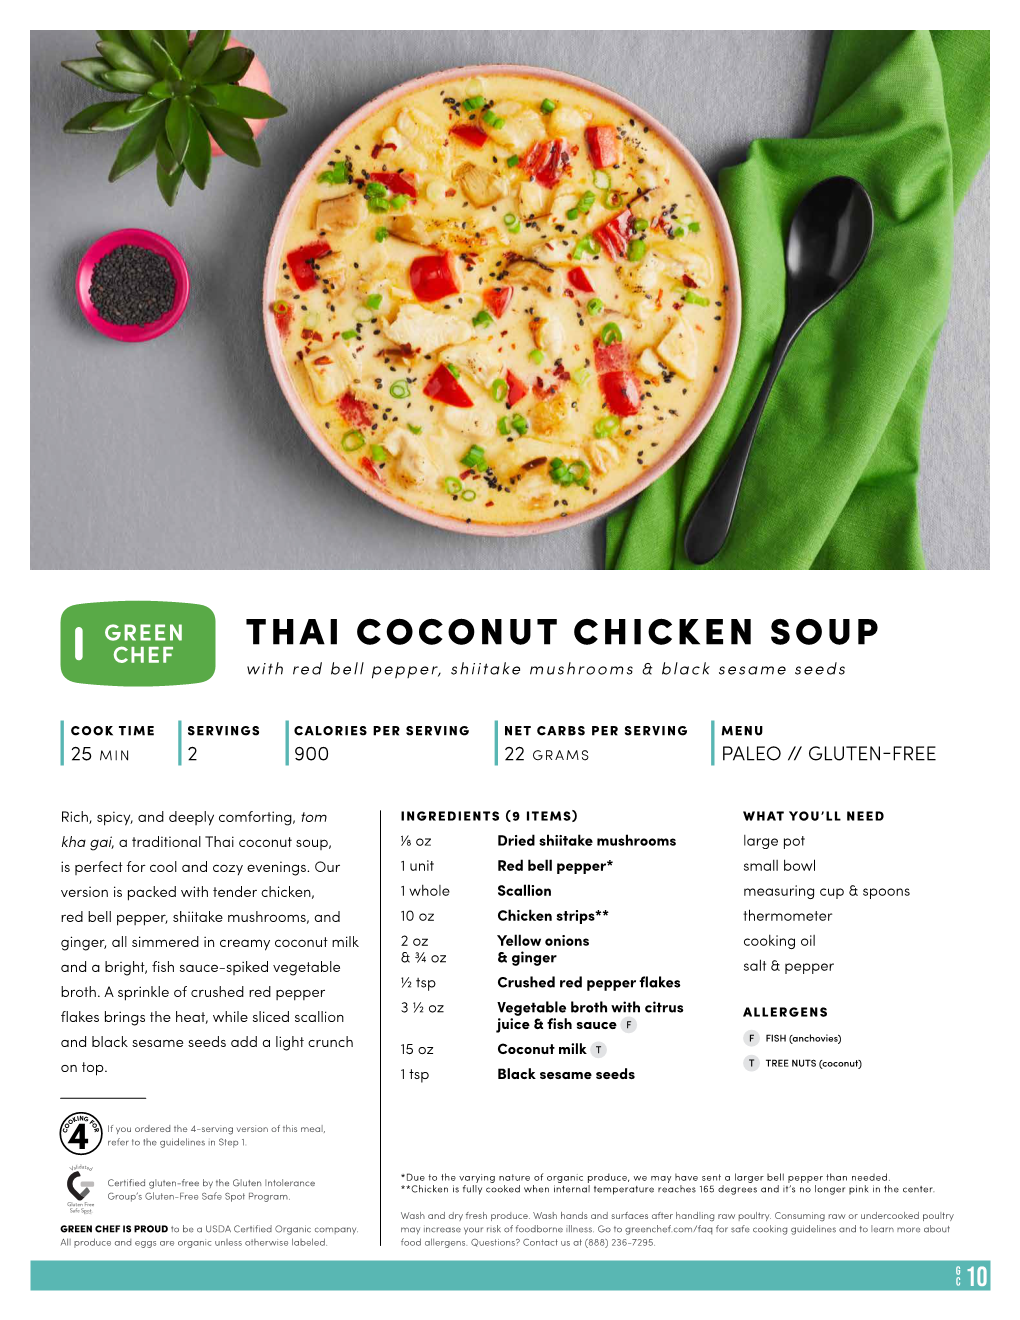 THAI COCONUT CHICKEN SOUP with Red Bell Pepper, Shiitake Mushrooms & Black Sesame Seeds